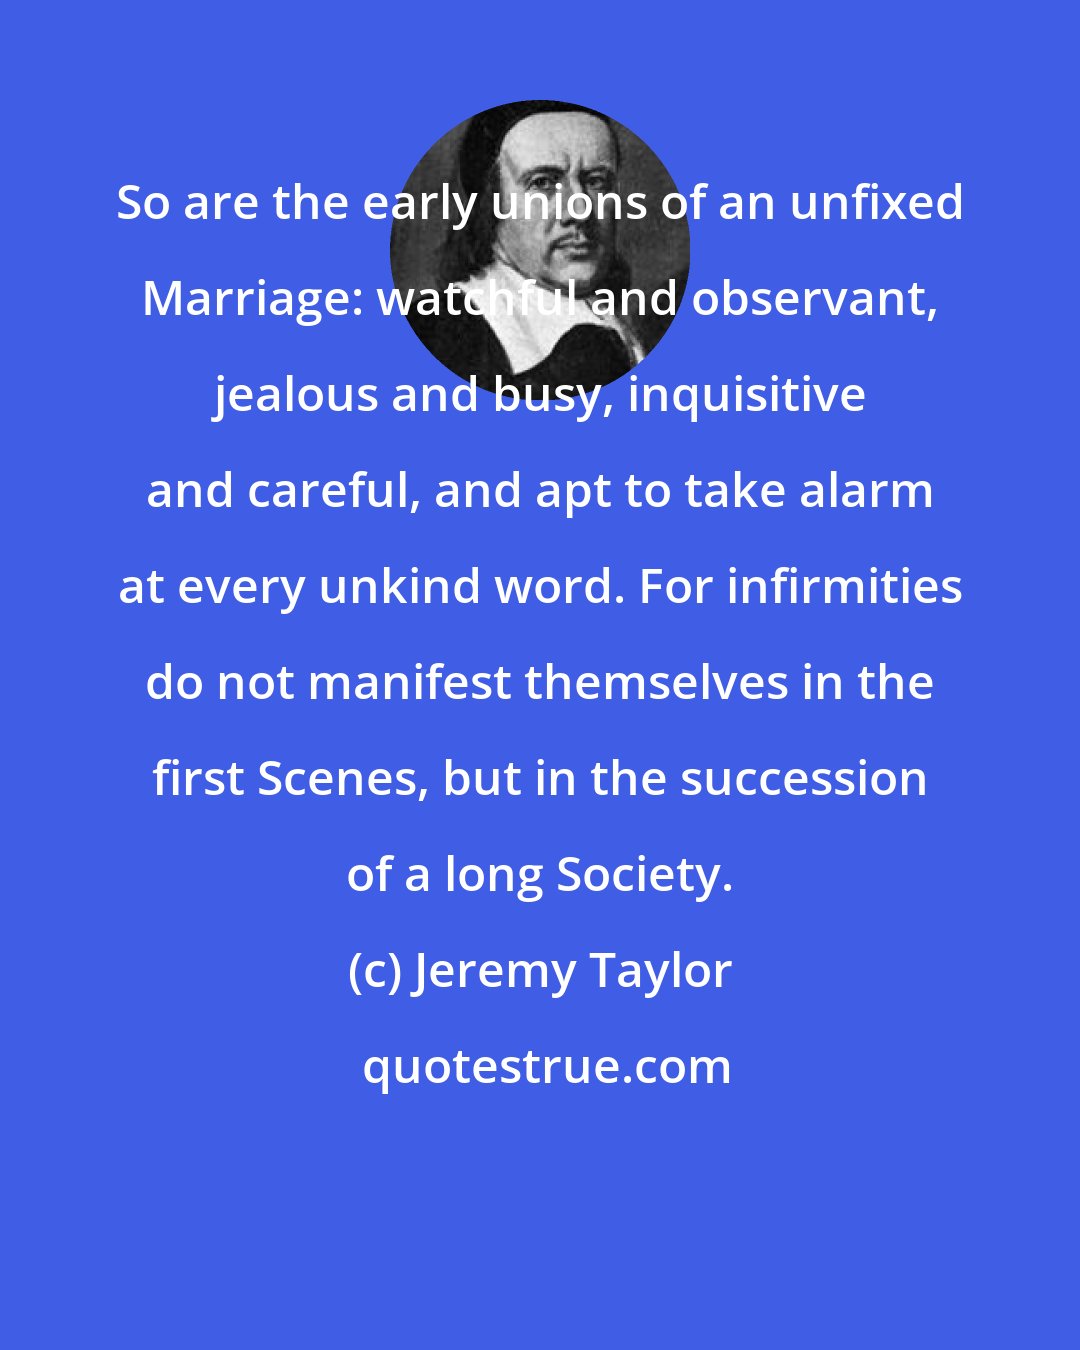 Jeremy Taylor: So are the early unions of an unfixed Marriage: watchful and observant, jealous and busy, inquisitive and careful, and apt to take alarm at every unkind word. For infirmities do not manifest themselves in the first Scenes, but in the succession of a long Society.